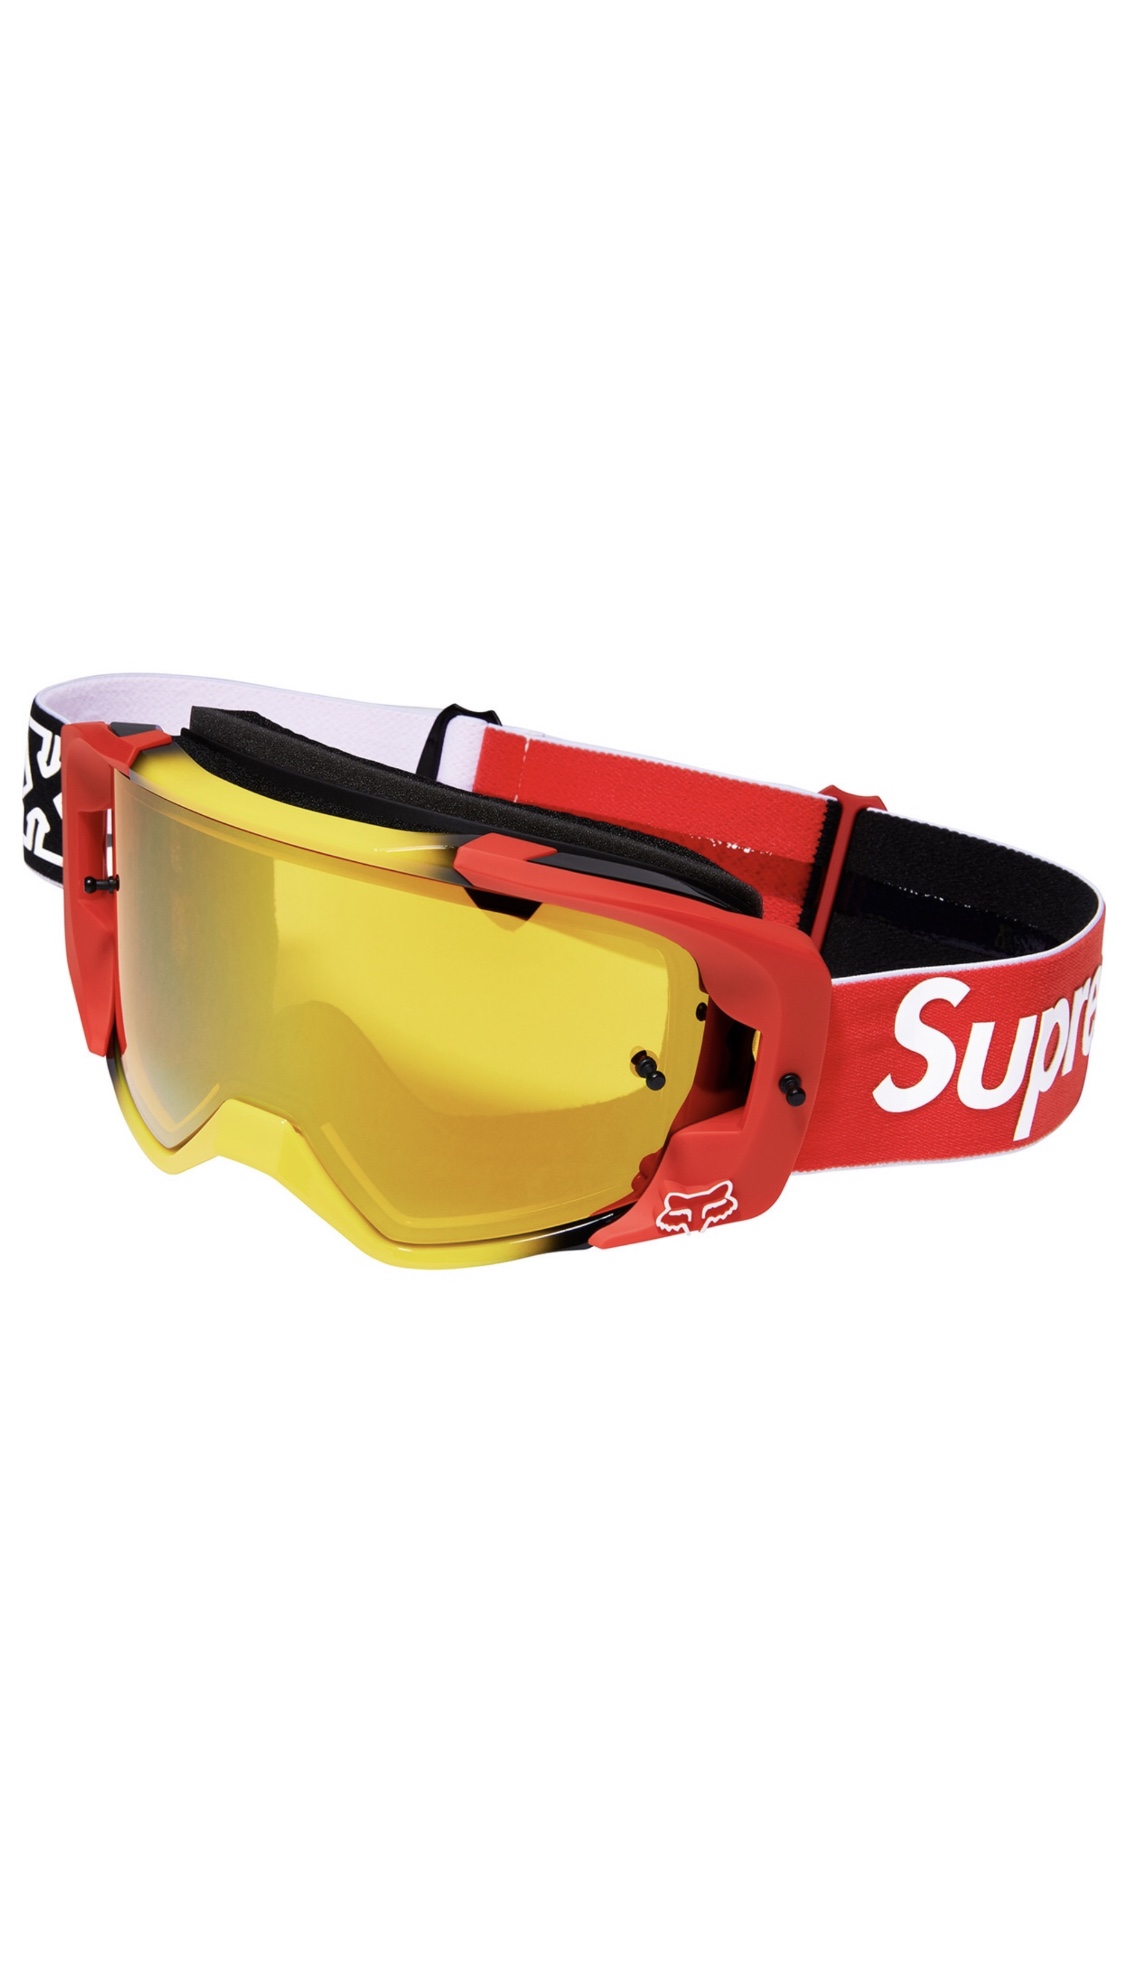 Supreme Racing Goggles Hotsell, 52% OFF | www.emanagreen.com